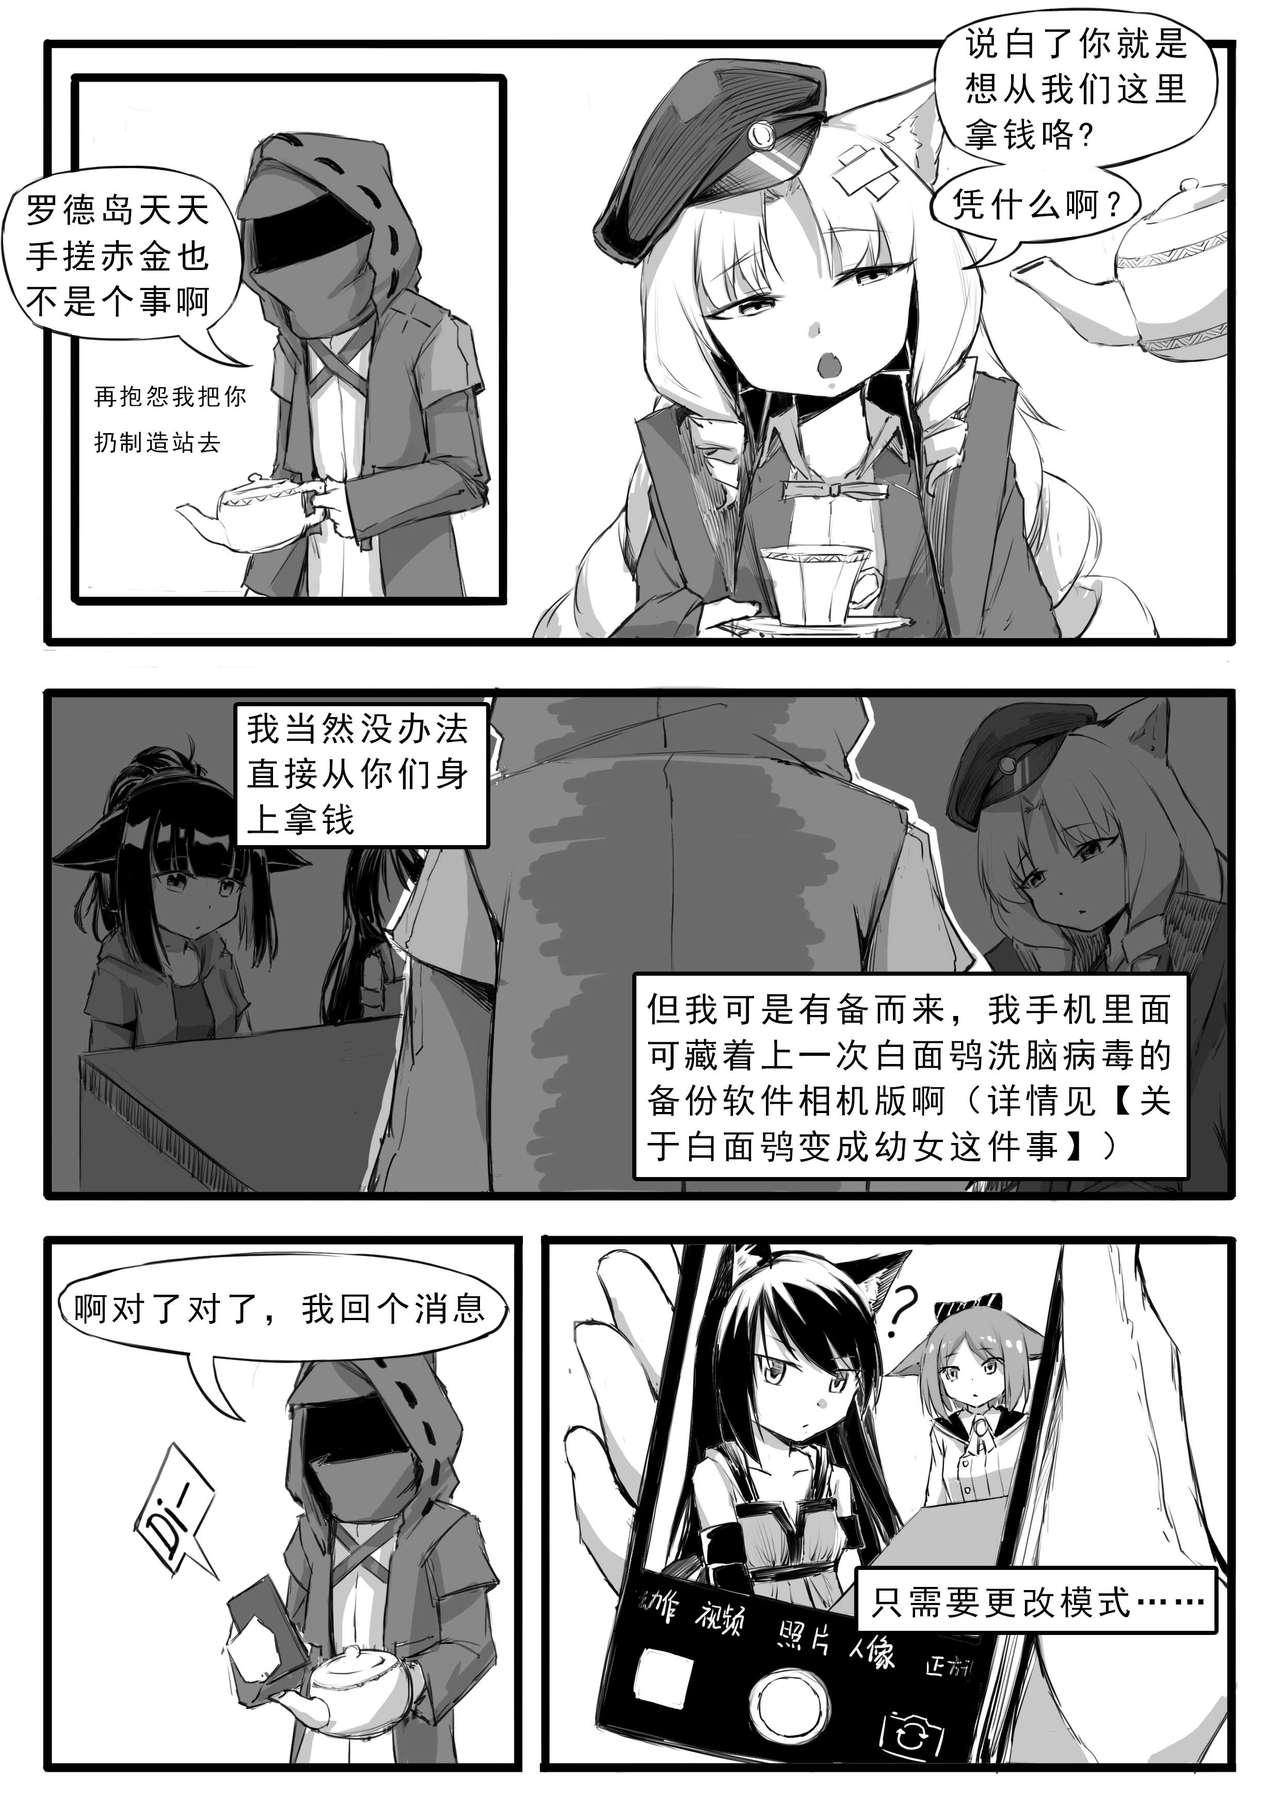 Work 本博士不想努力了 - Arknights Coed - Page 5